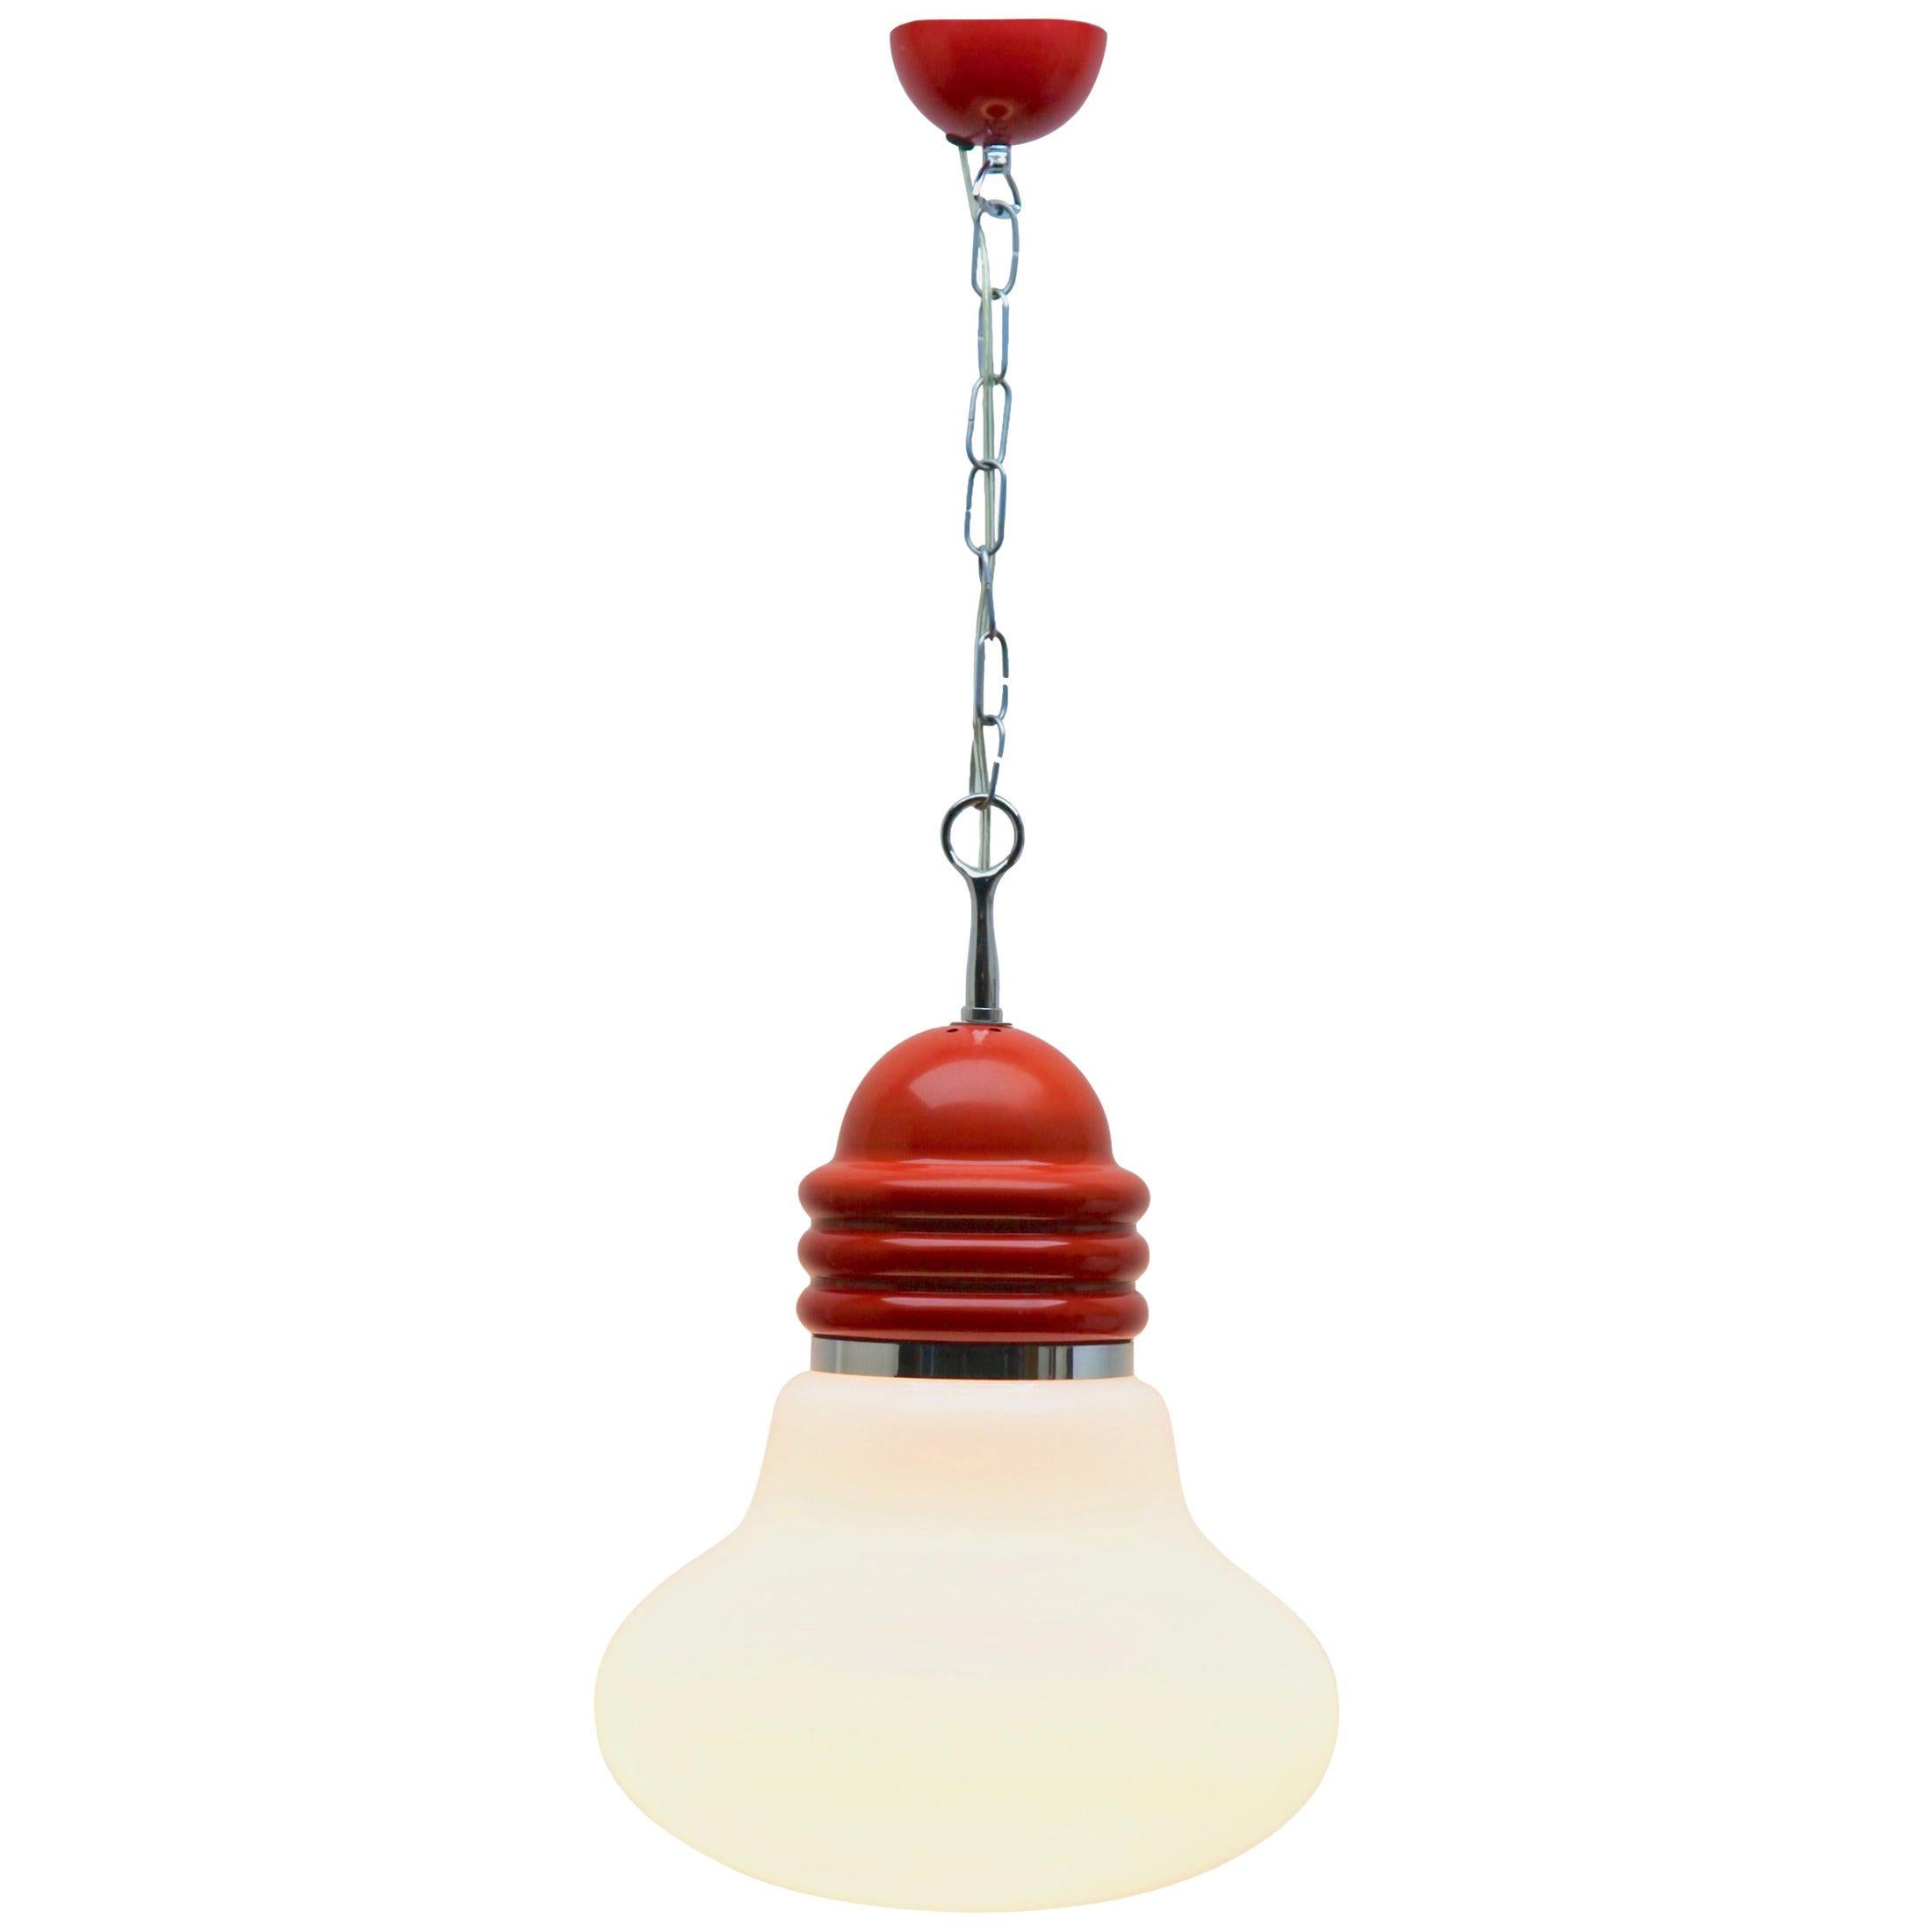 Vintage Pendant Ceiling Light in the Schape of a Big Bulb, Opaque Glass, 1960s For Sale